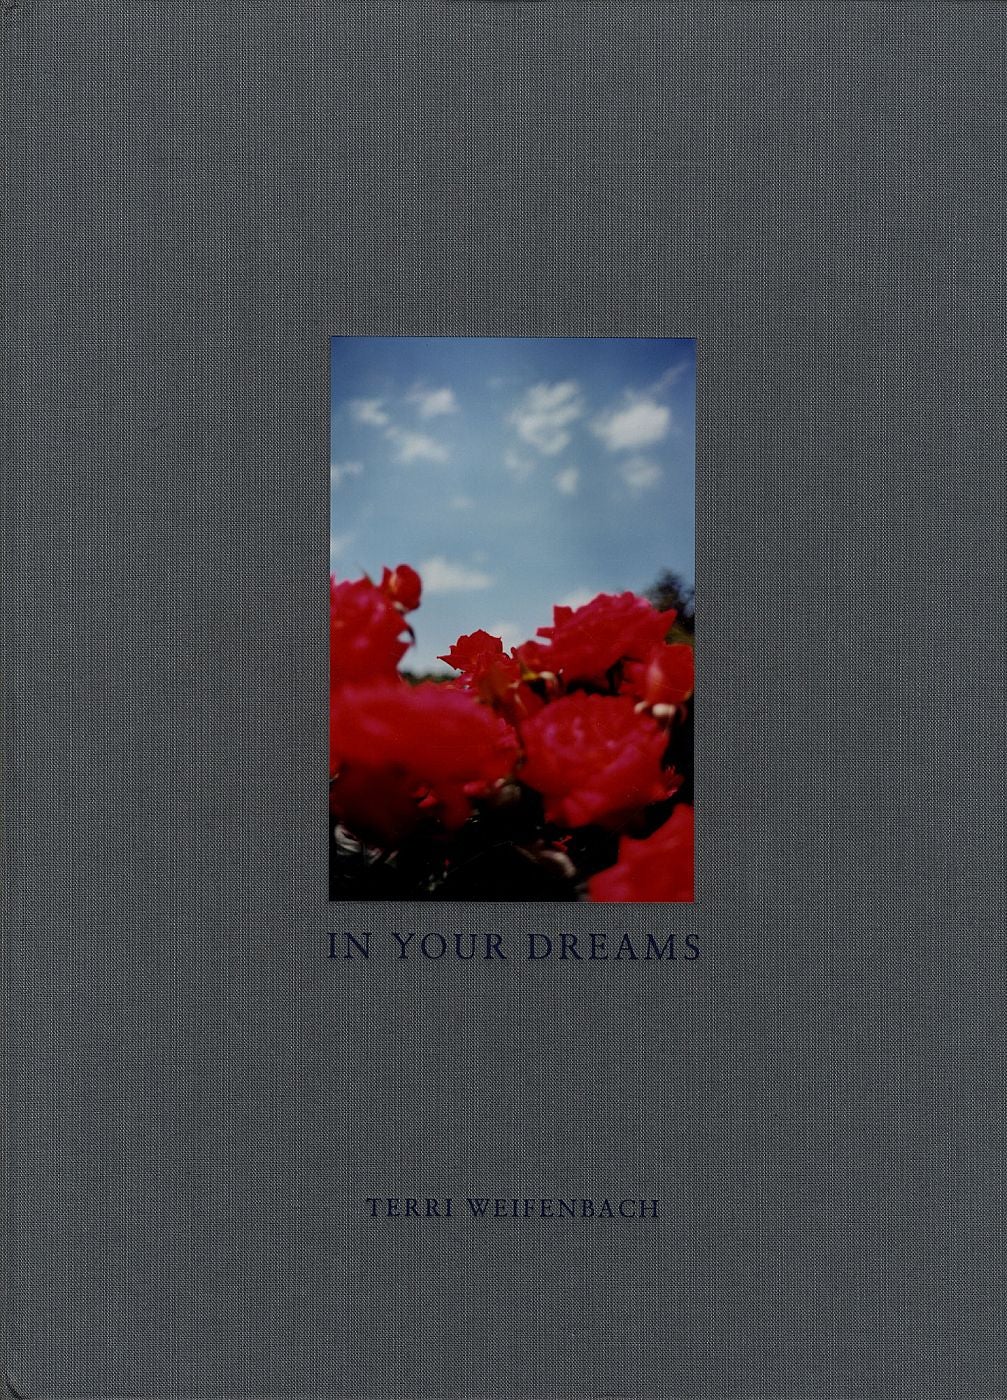 Terri Weifenbach: In Your Dreams, Limited Edition with Tipped-In